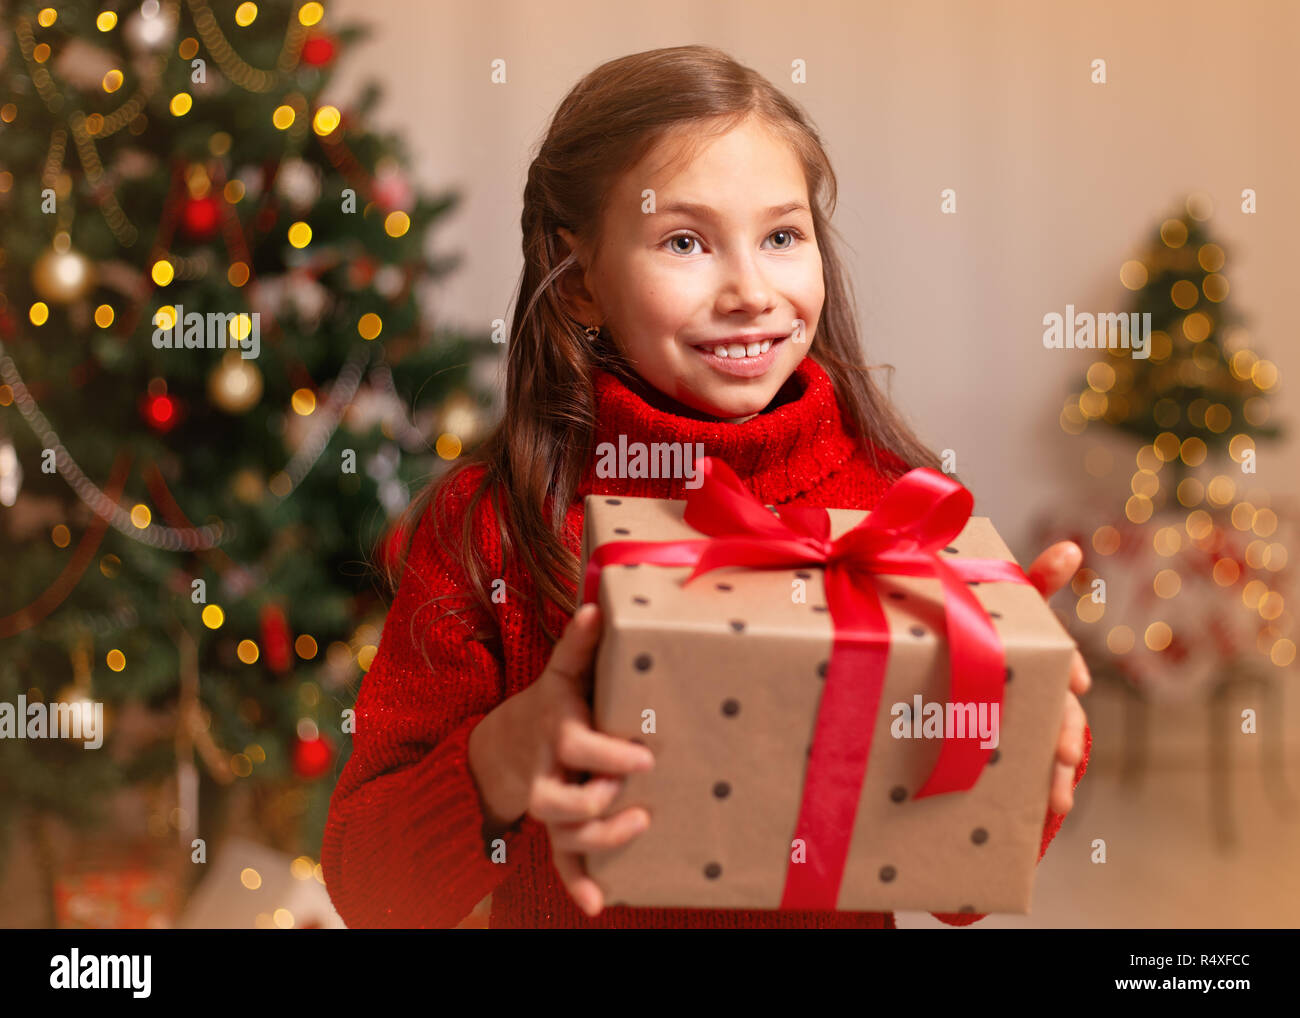 Cute little child girl with present gift box near Christmas tree at home. Stock Photo